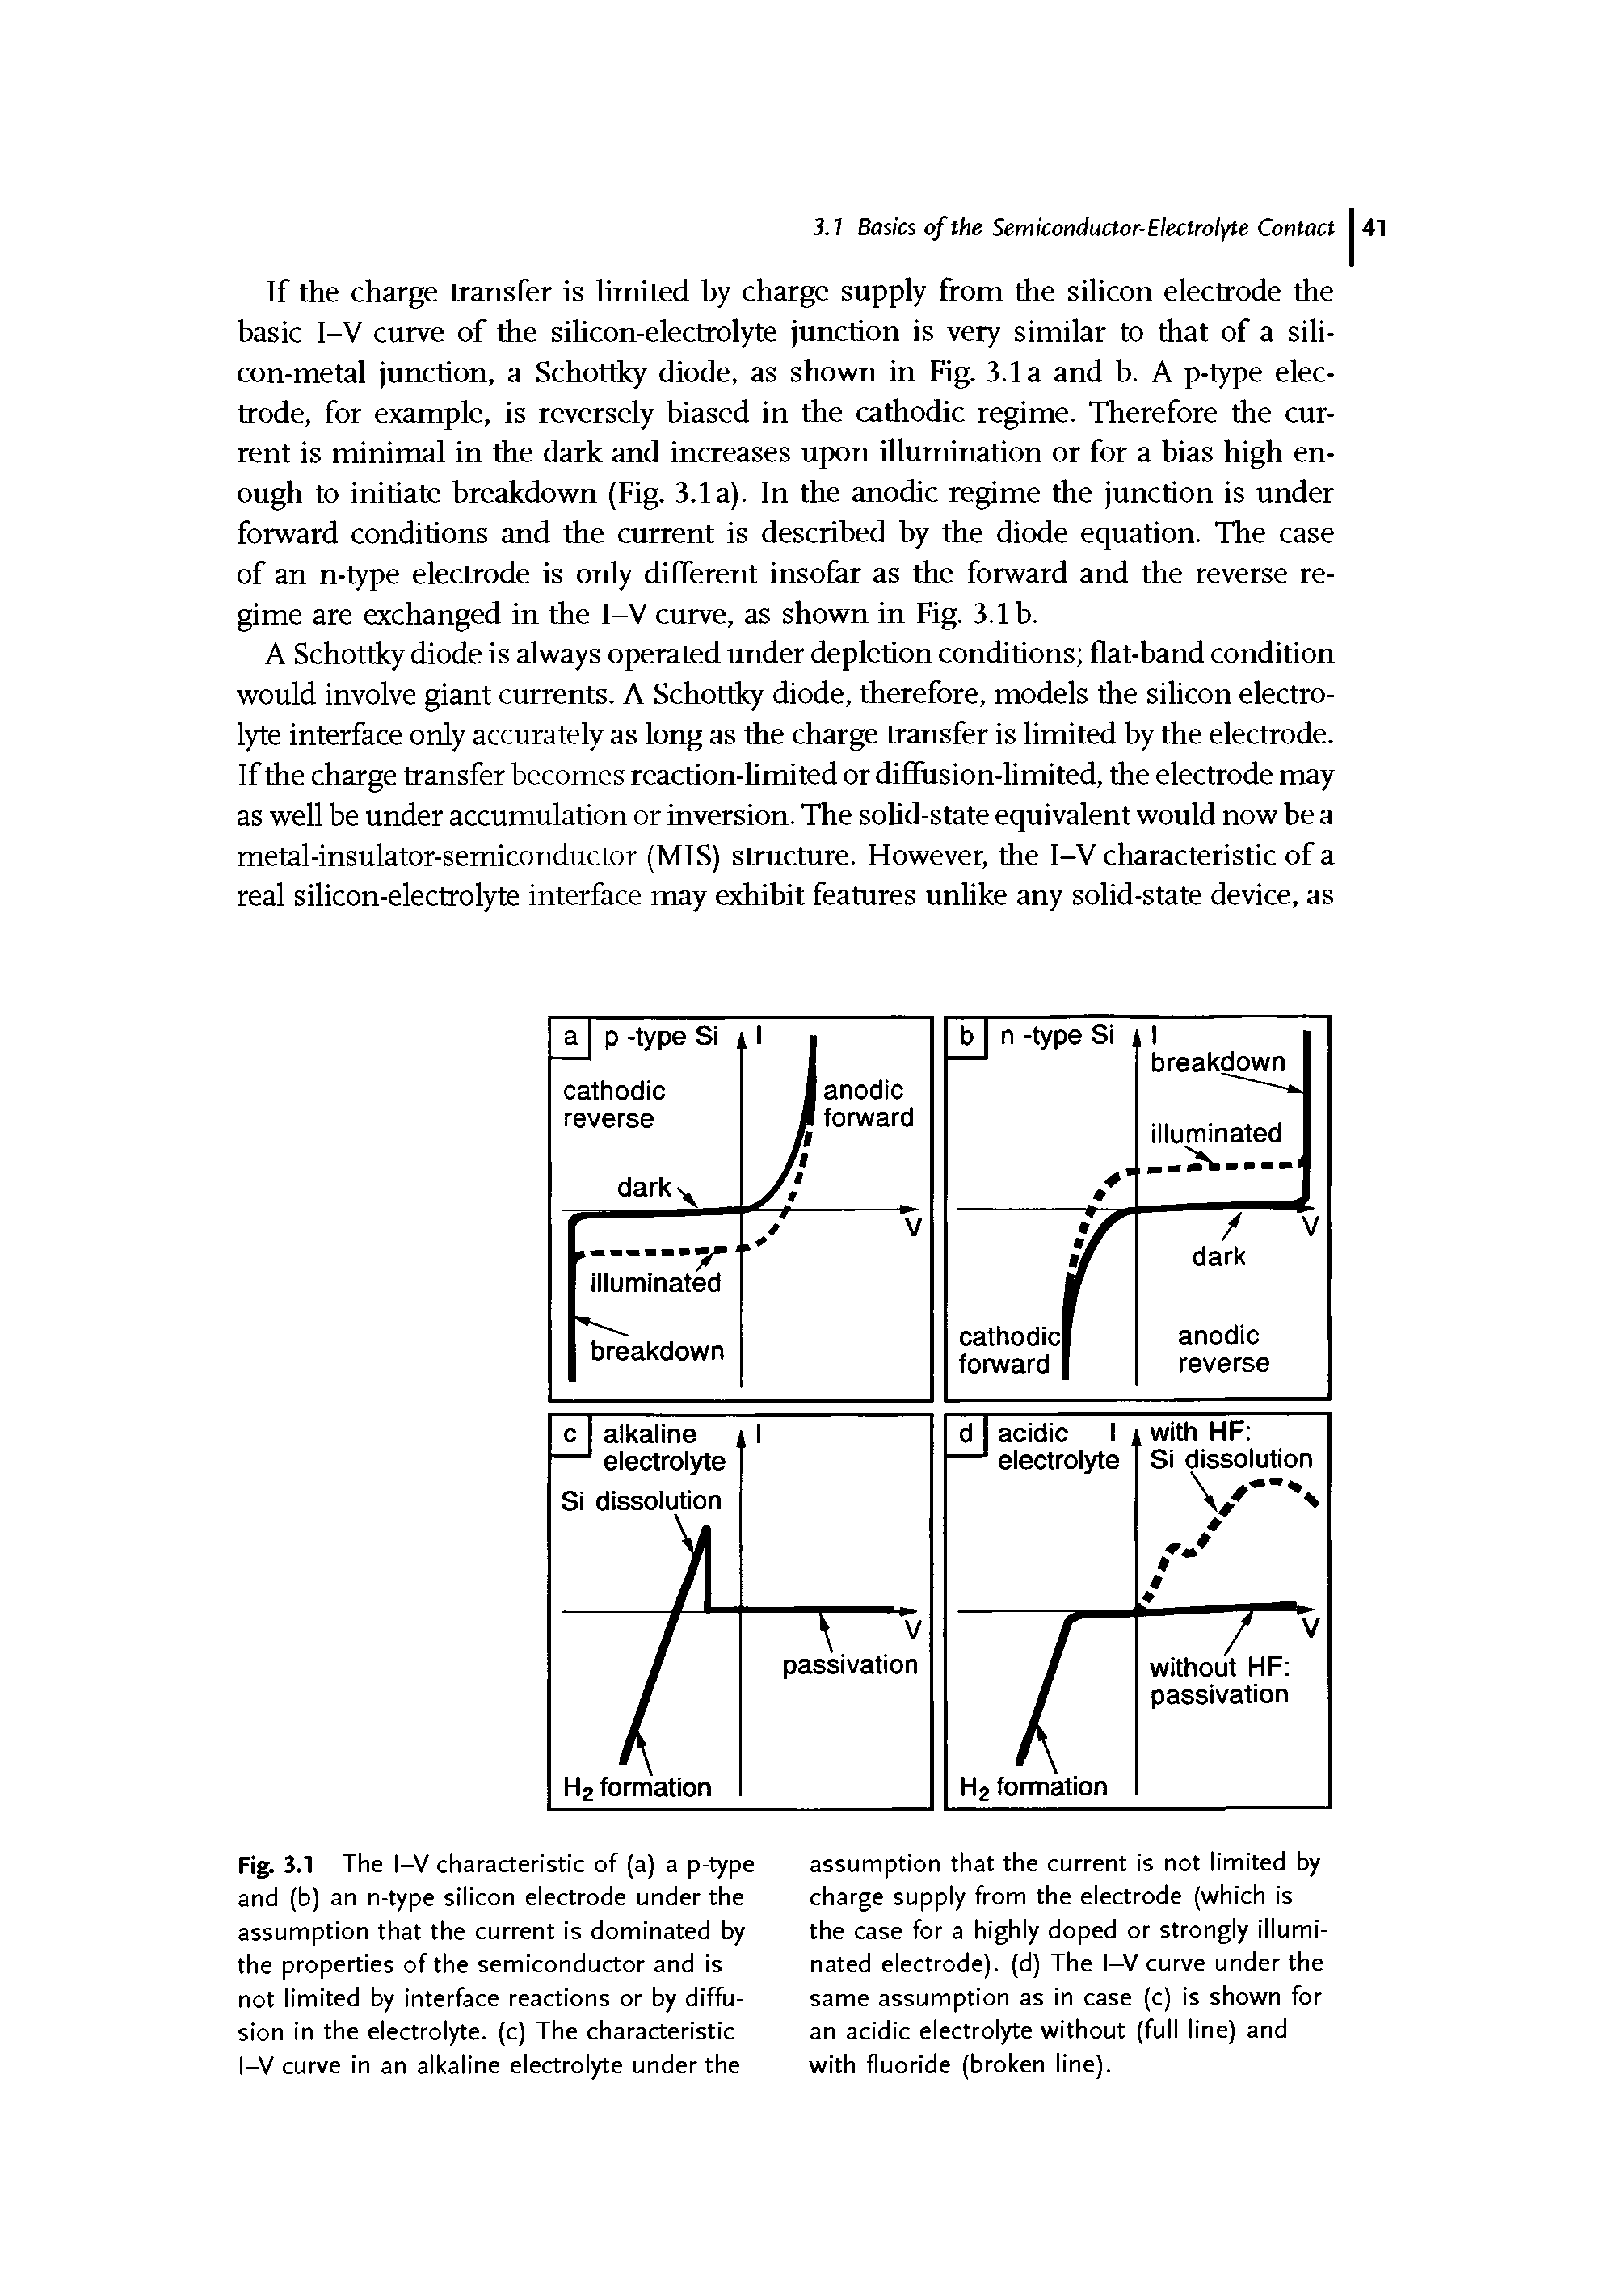 Fig. 3.1 The I—V characteristic of (a) a p-type and (b) an n-type silicon electrode under the assumption that the current is dominated by the properties of the semiconductor and is not limited by interface reactions or by diffusion in the electrolyte, (c) The characteristic I—V curve in an alkaline electrolyte under the...